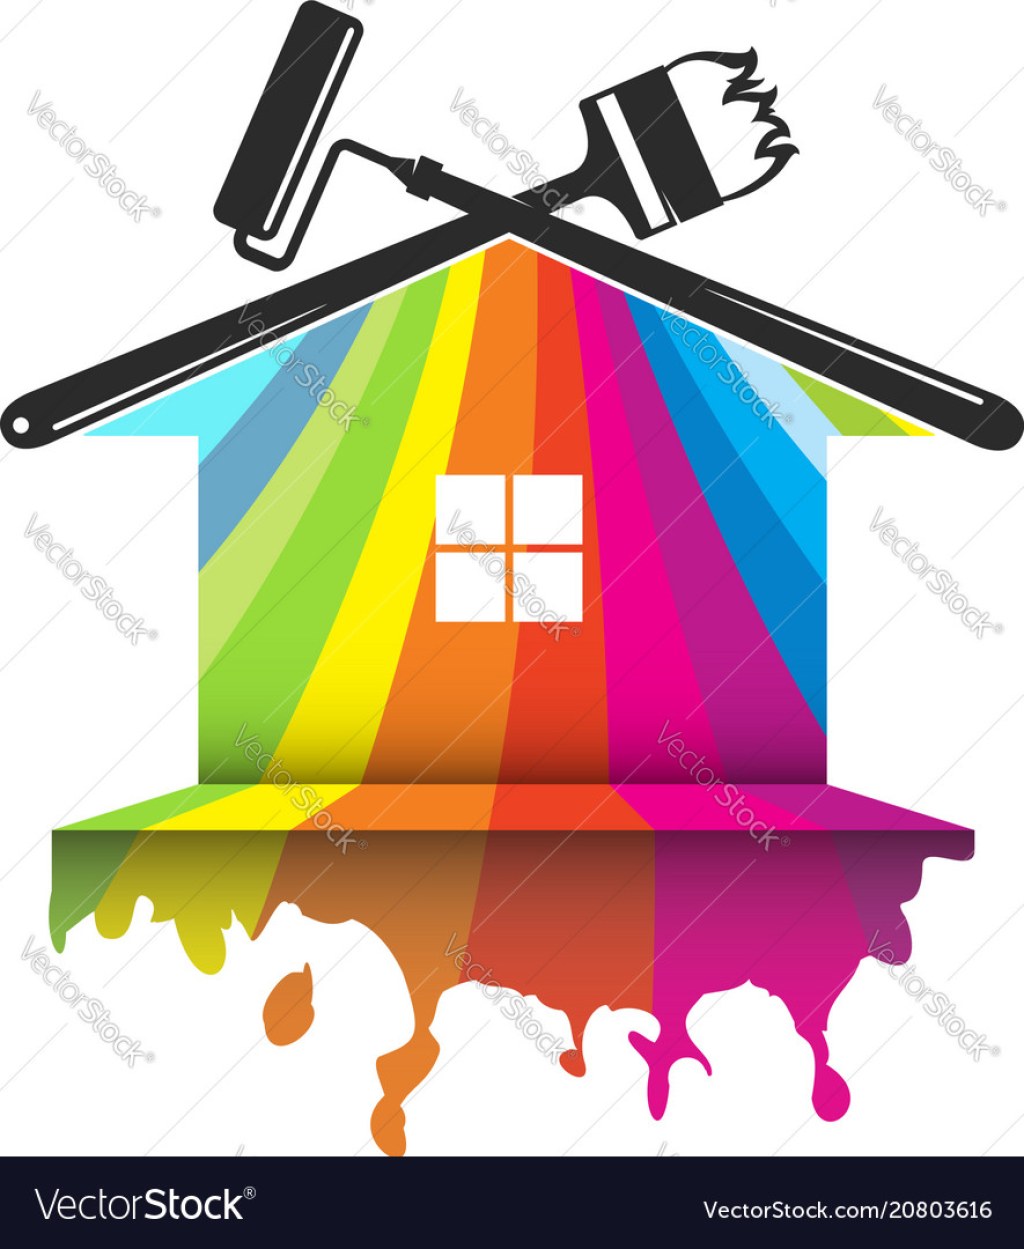 Picture of: Design for house painting Royalty Free Vector Image